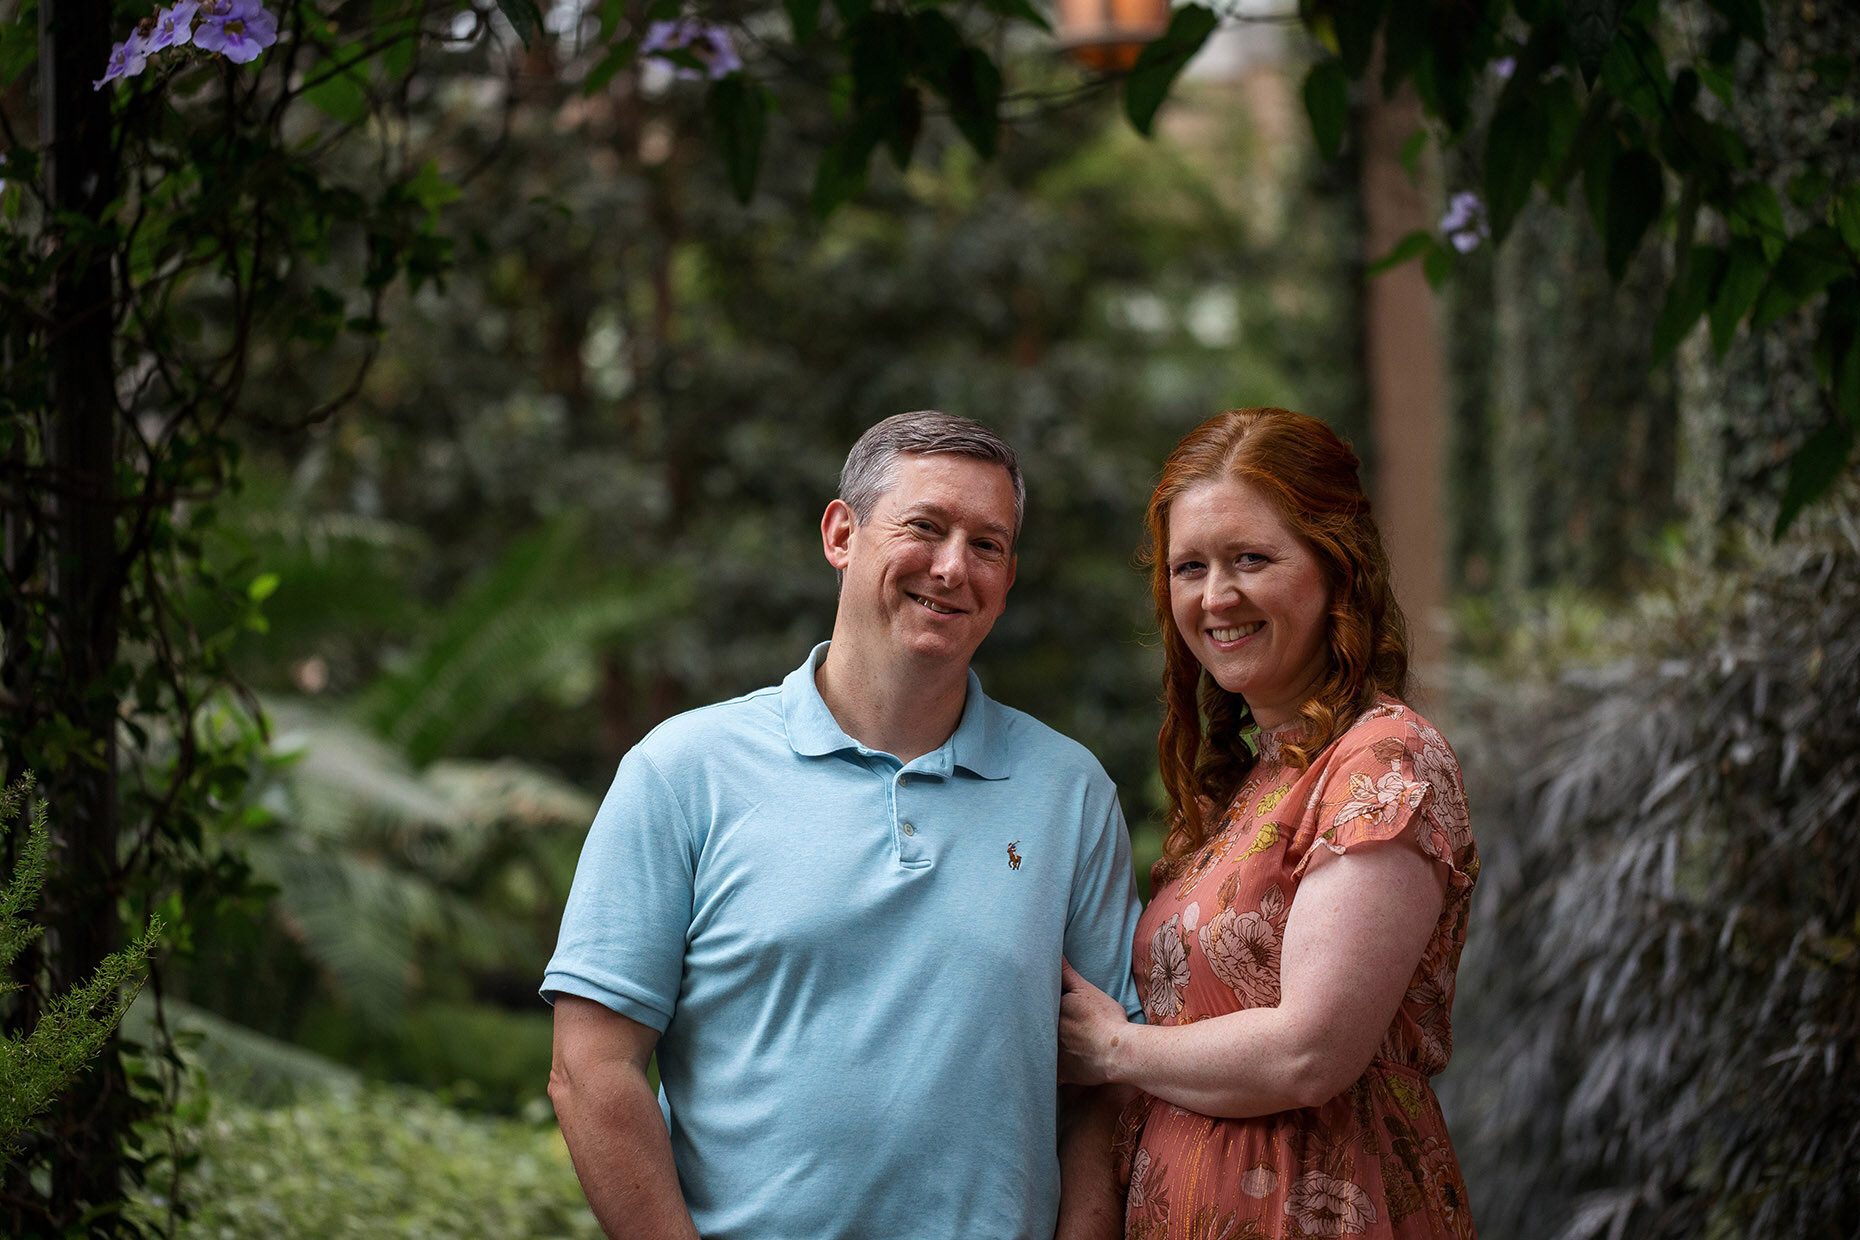 Mary &amp; Dan at the Conservatory Greenhouse at Longwood Gardens Kennett Square, PA with so much Greenery